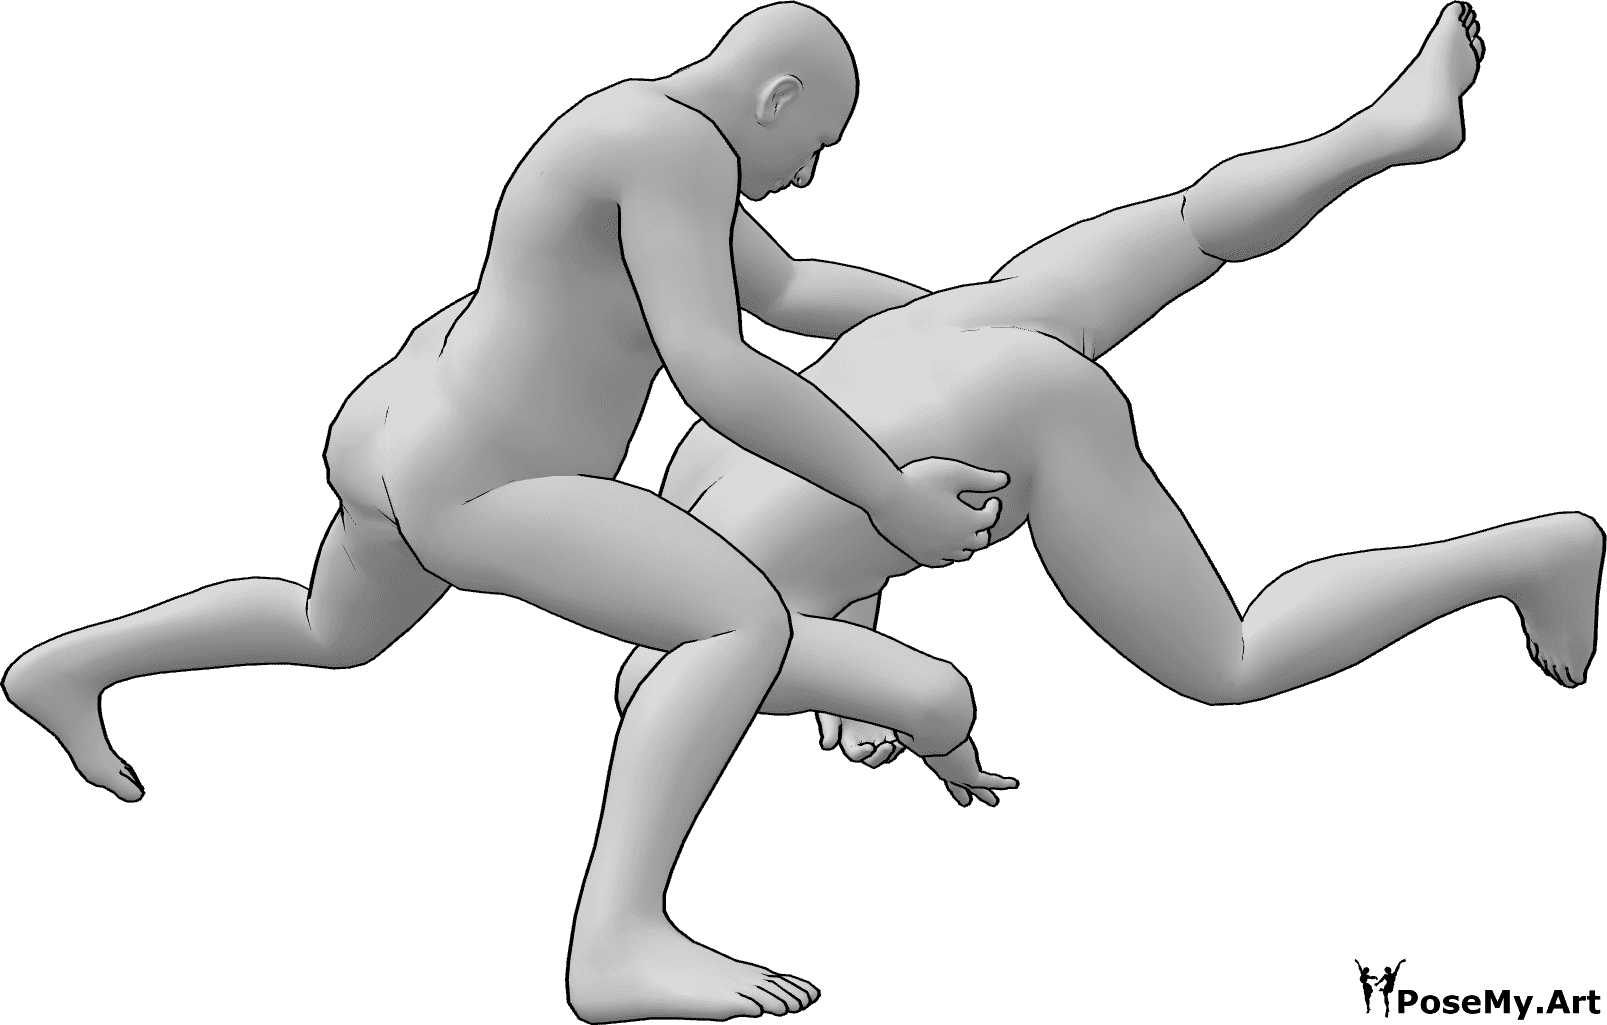 Pose Reference- Sumo wrestling discard pose - Two male sumo wrestlers, one of them successfully discards the other while wrestling